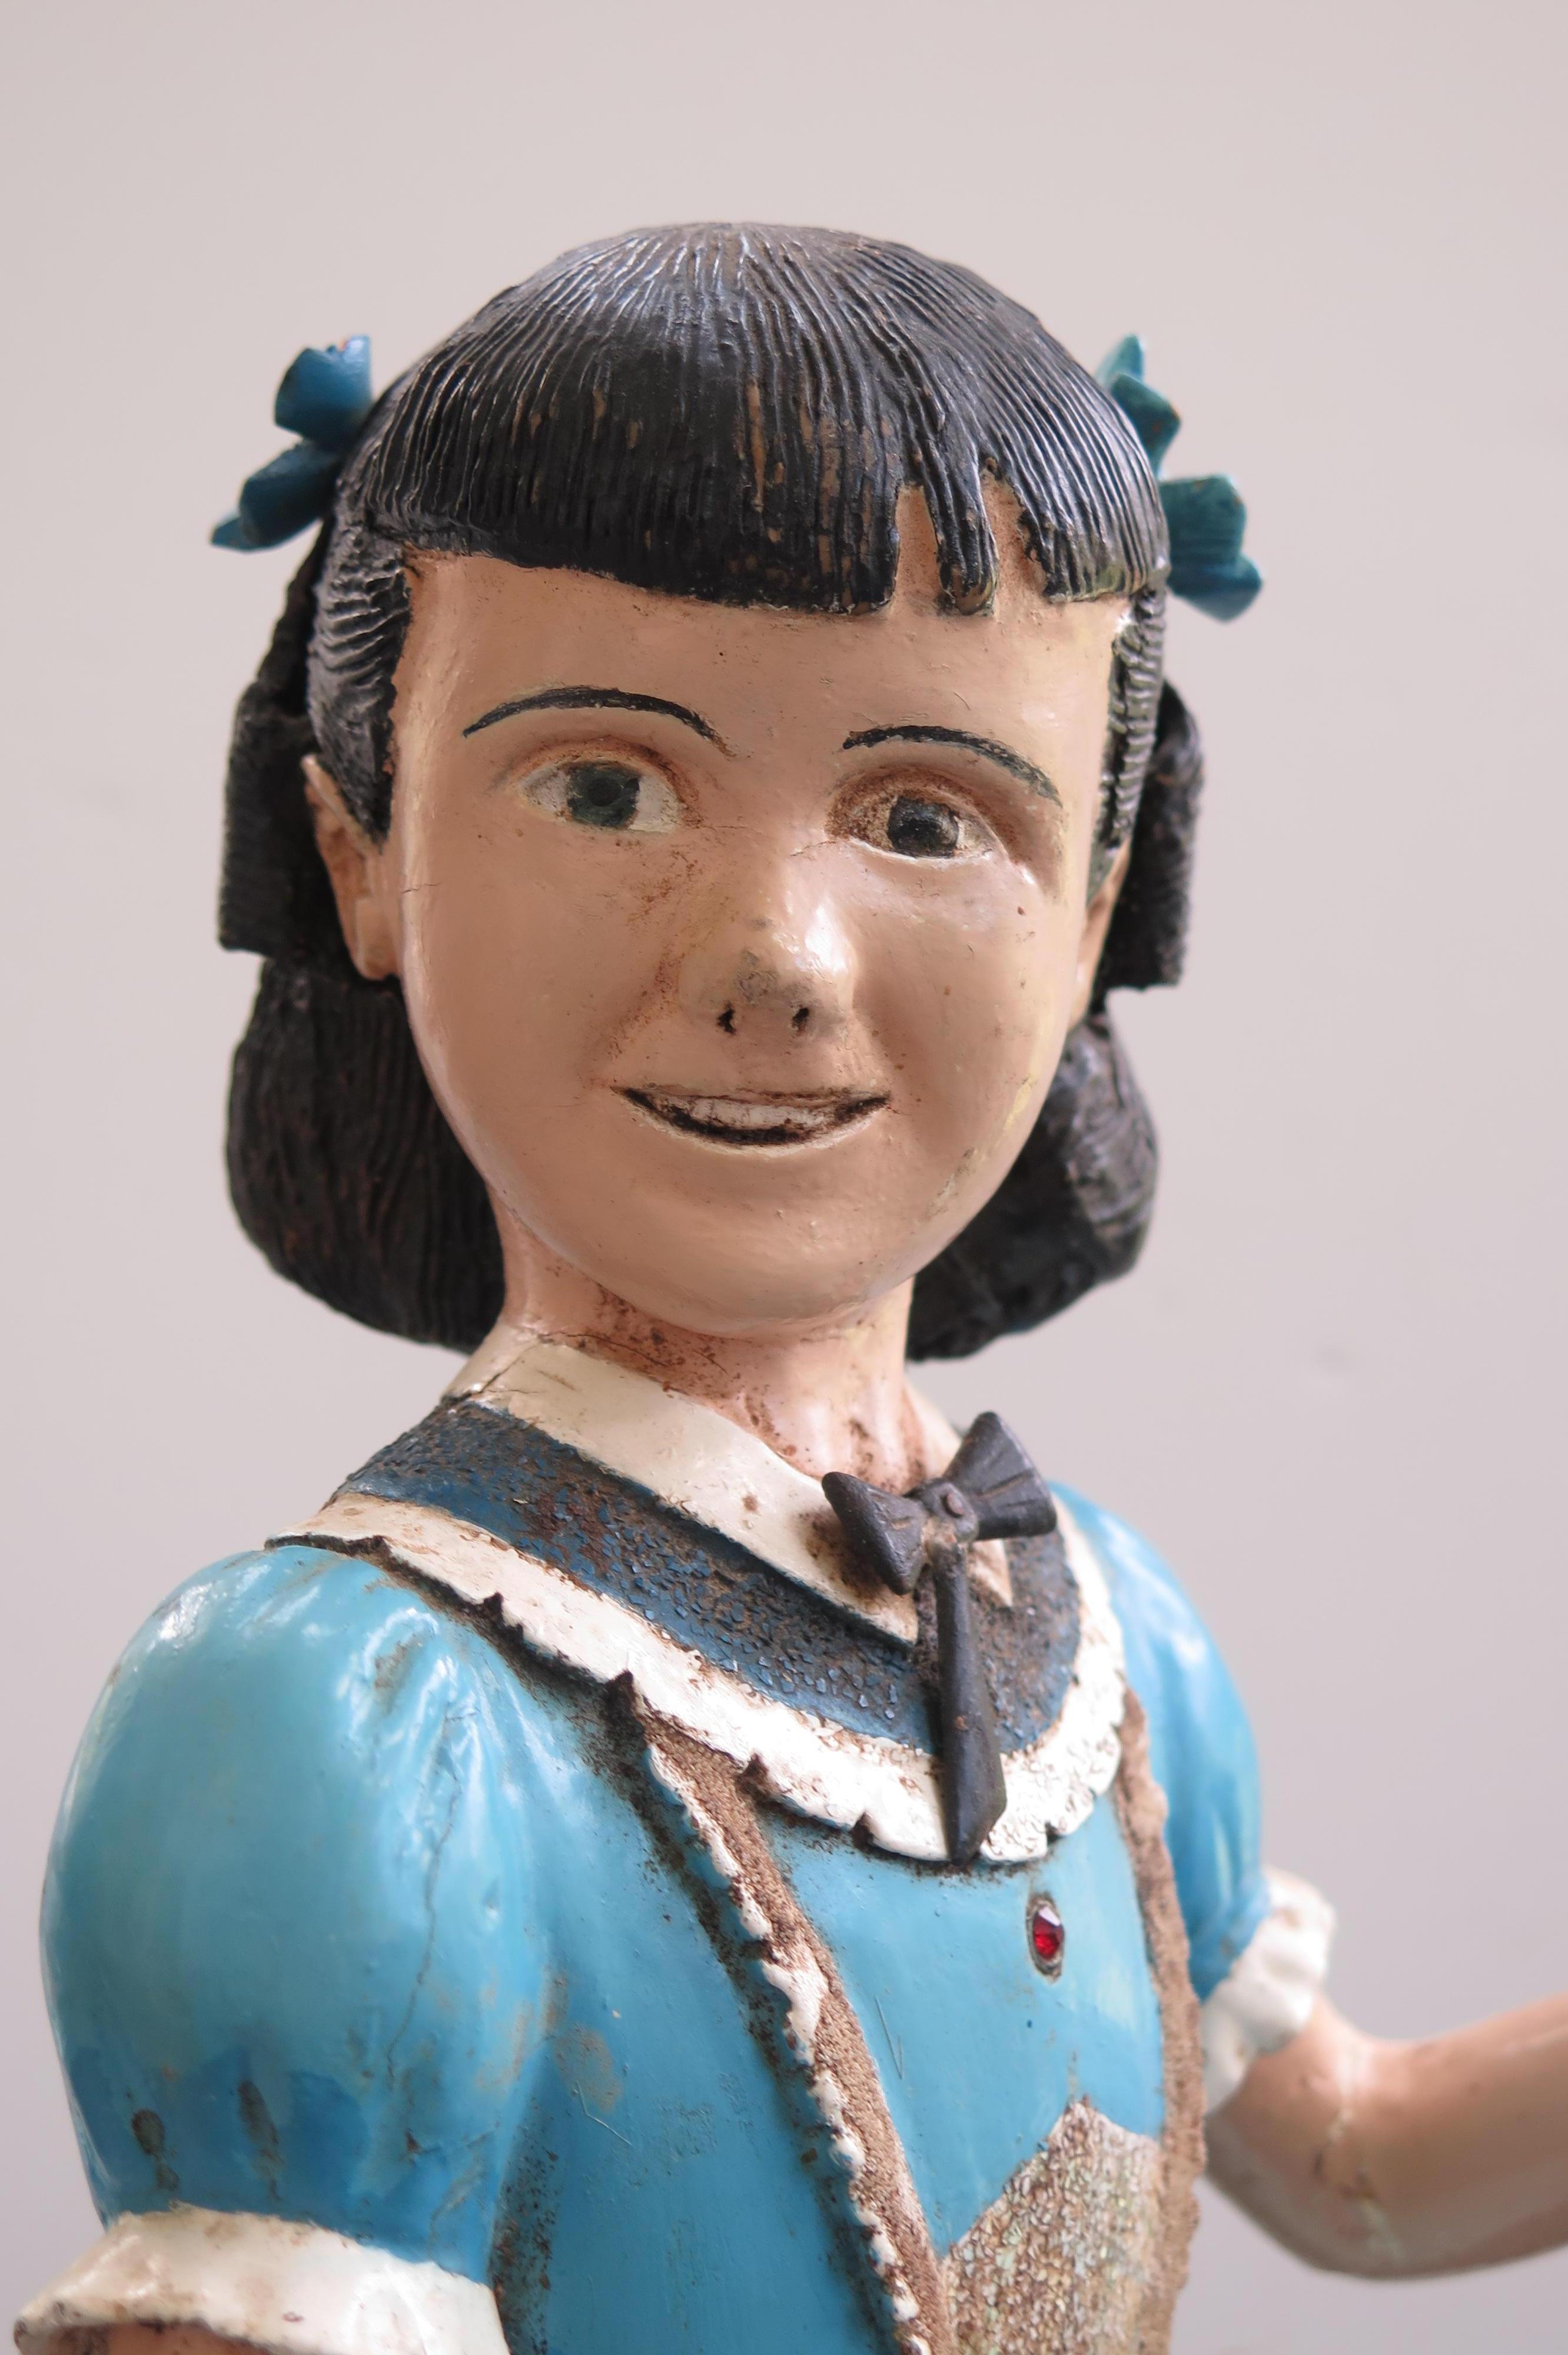 Harold Ibach and his wife were not able to have children but Harold could carve so he made an imaginary daughter he called Kitty. Kitty was carved and pieced of wood and meticulously painted. The turned head animated the girl and he added bows to